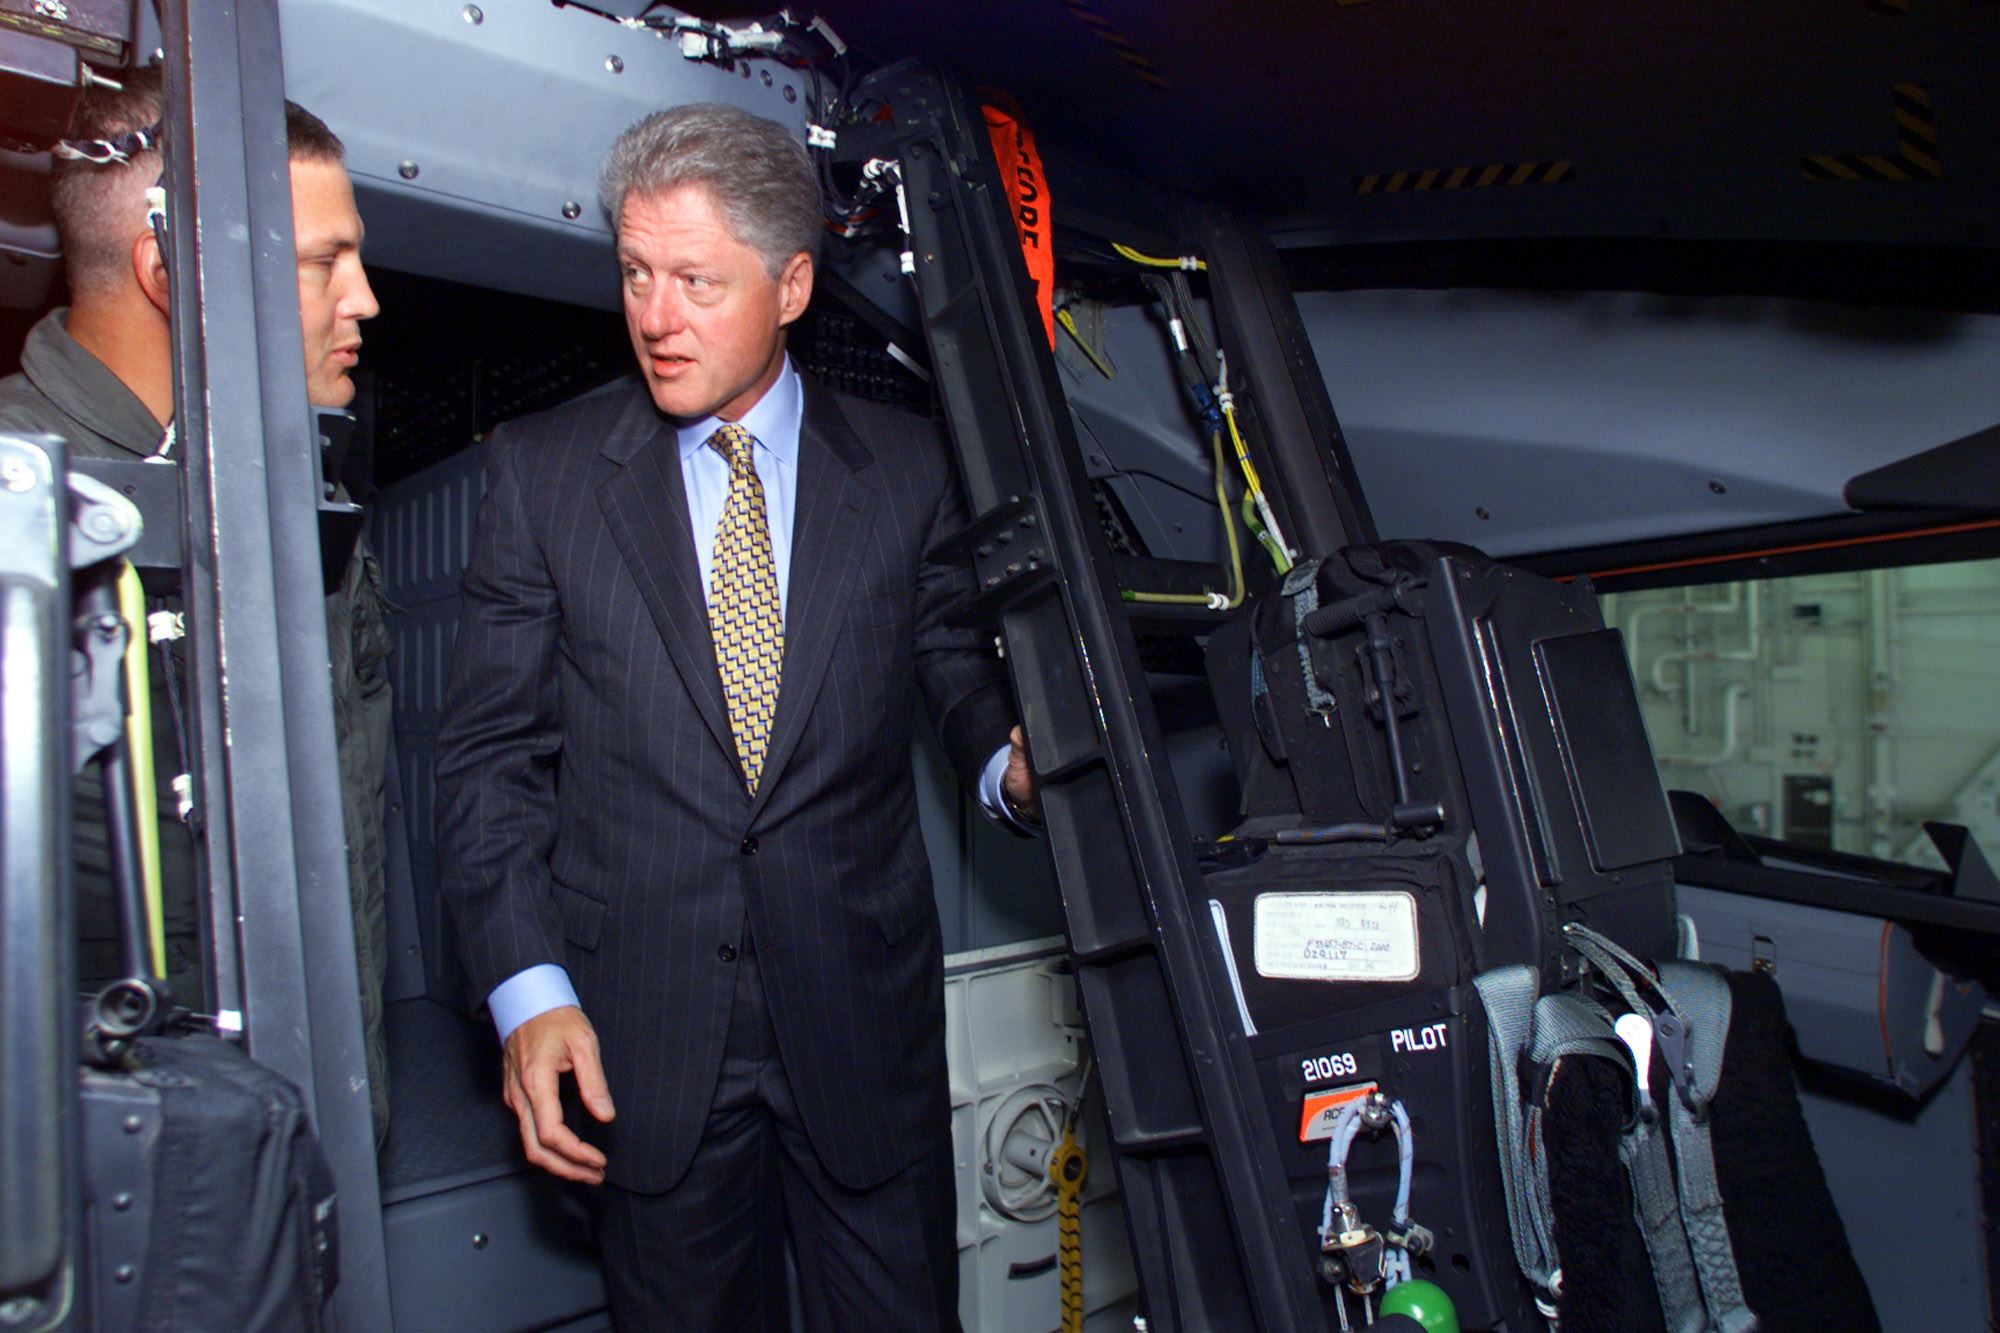 WHITEMAN AIR FORCE BASE, MO - JUNE 11:  US President Bill Clinton inspects the interior of a B-2 bomber during his visit to Whiteman Air Force Base 11 June 1999 near Knob Noster, MO.  Clinton visited the base to thank the men and women of US stealth bomber crews for their efforts during Operation Allied Force.  Pilot at left is unidentified.  (Photo credit should read AFP/AFP via Getty Images)